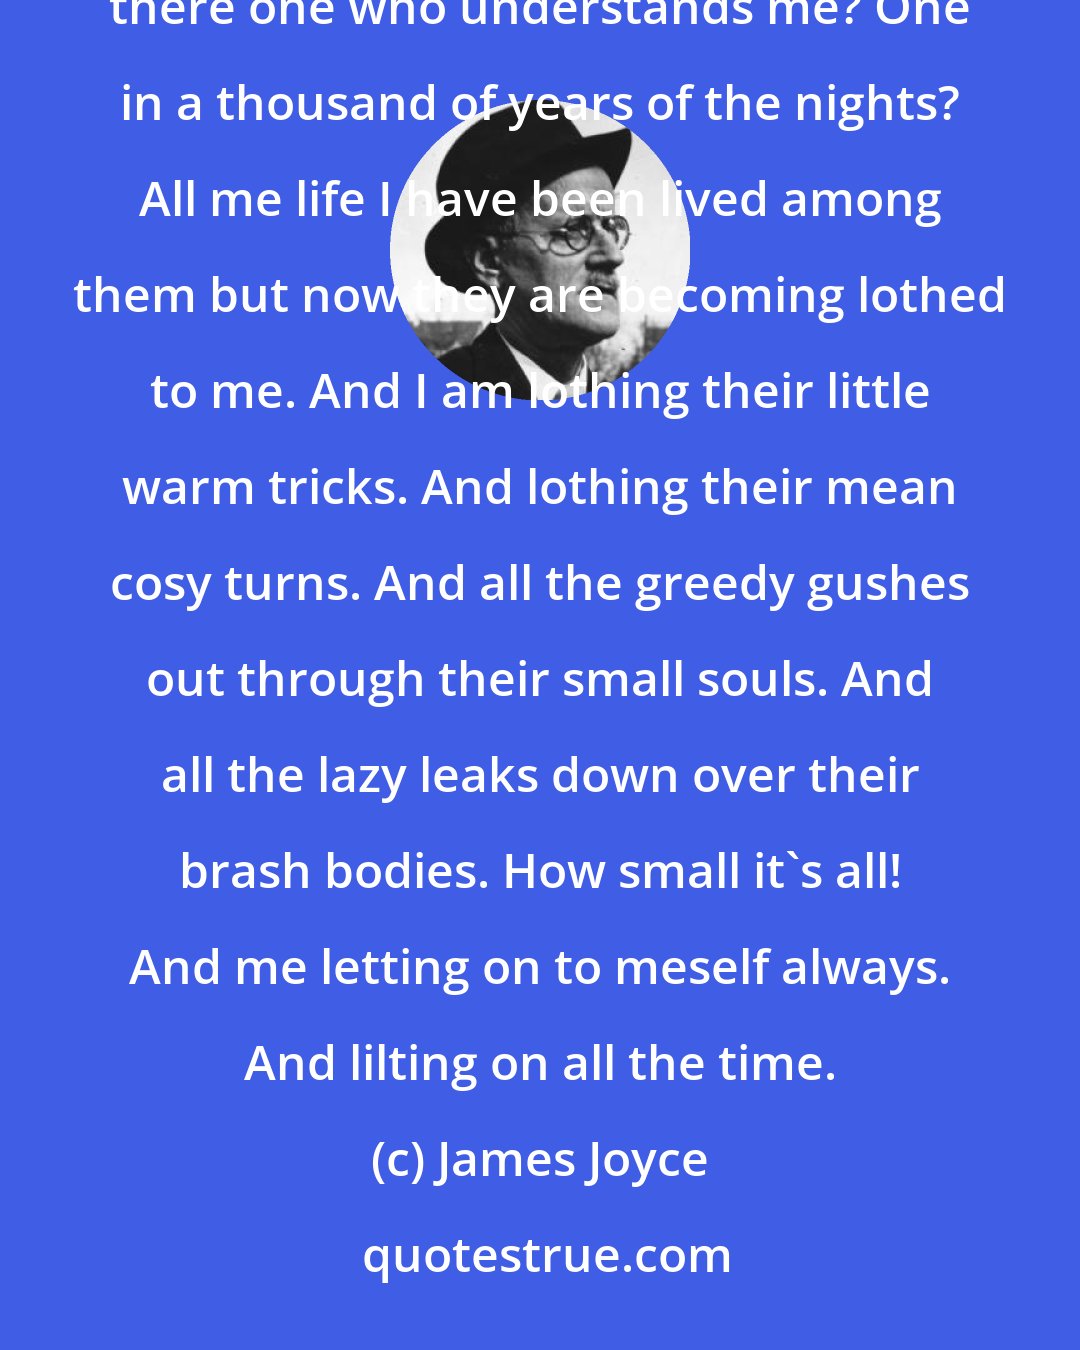 James Joyce: I done me best when I was let. Thinking always if I go all goes. A hundred cares, a tithe of troubles and is there one who understands me? One in a thousand of years of the nights? All me life I have been lived among them but now they are becoming lothed to me. And I am lothing their little warm tricks. And lothing their mean cosy turns. And all the greedy gushes out through their small souls. And all the lazy leaks down over their brash bodies. How small it's all! And me letting on to meself always. And lilting on all the time.